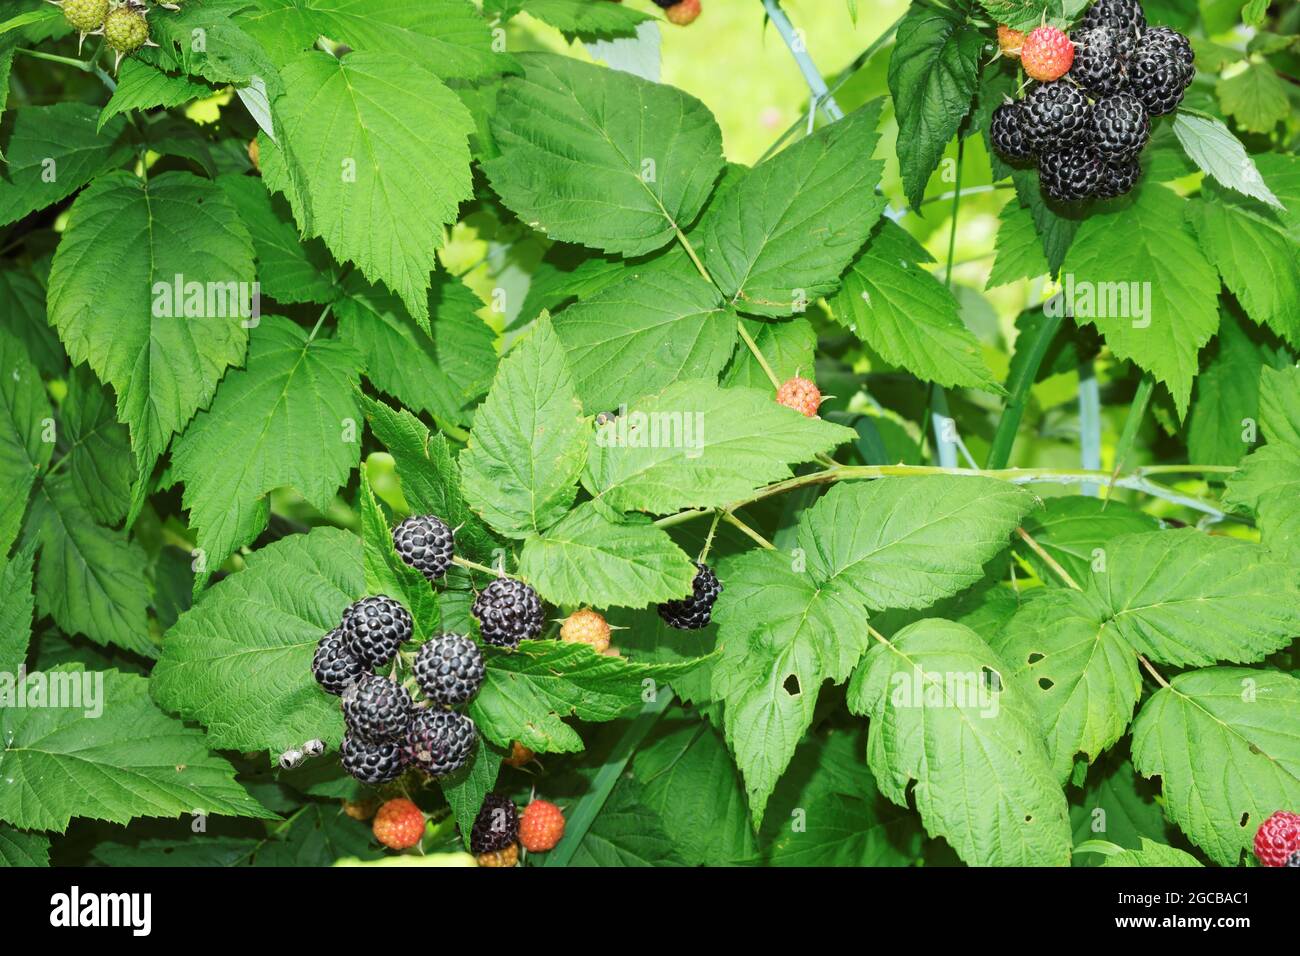 A bunch of ripe, juicy blackberries on a bush among green leaves. Selective focus. Stock Photo